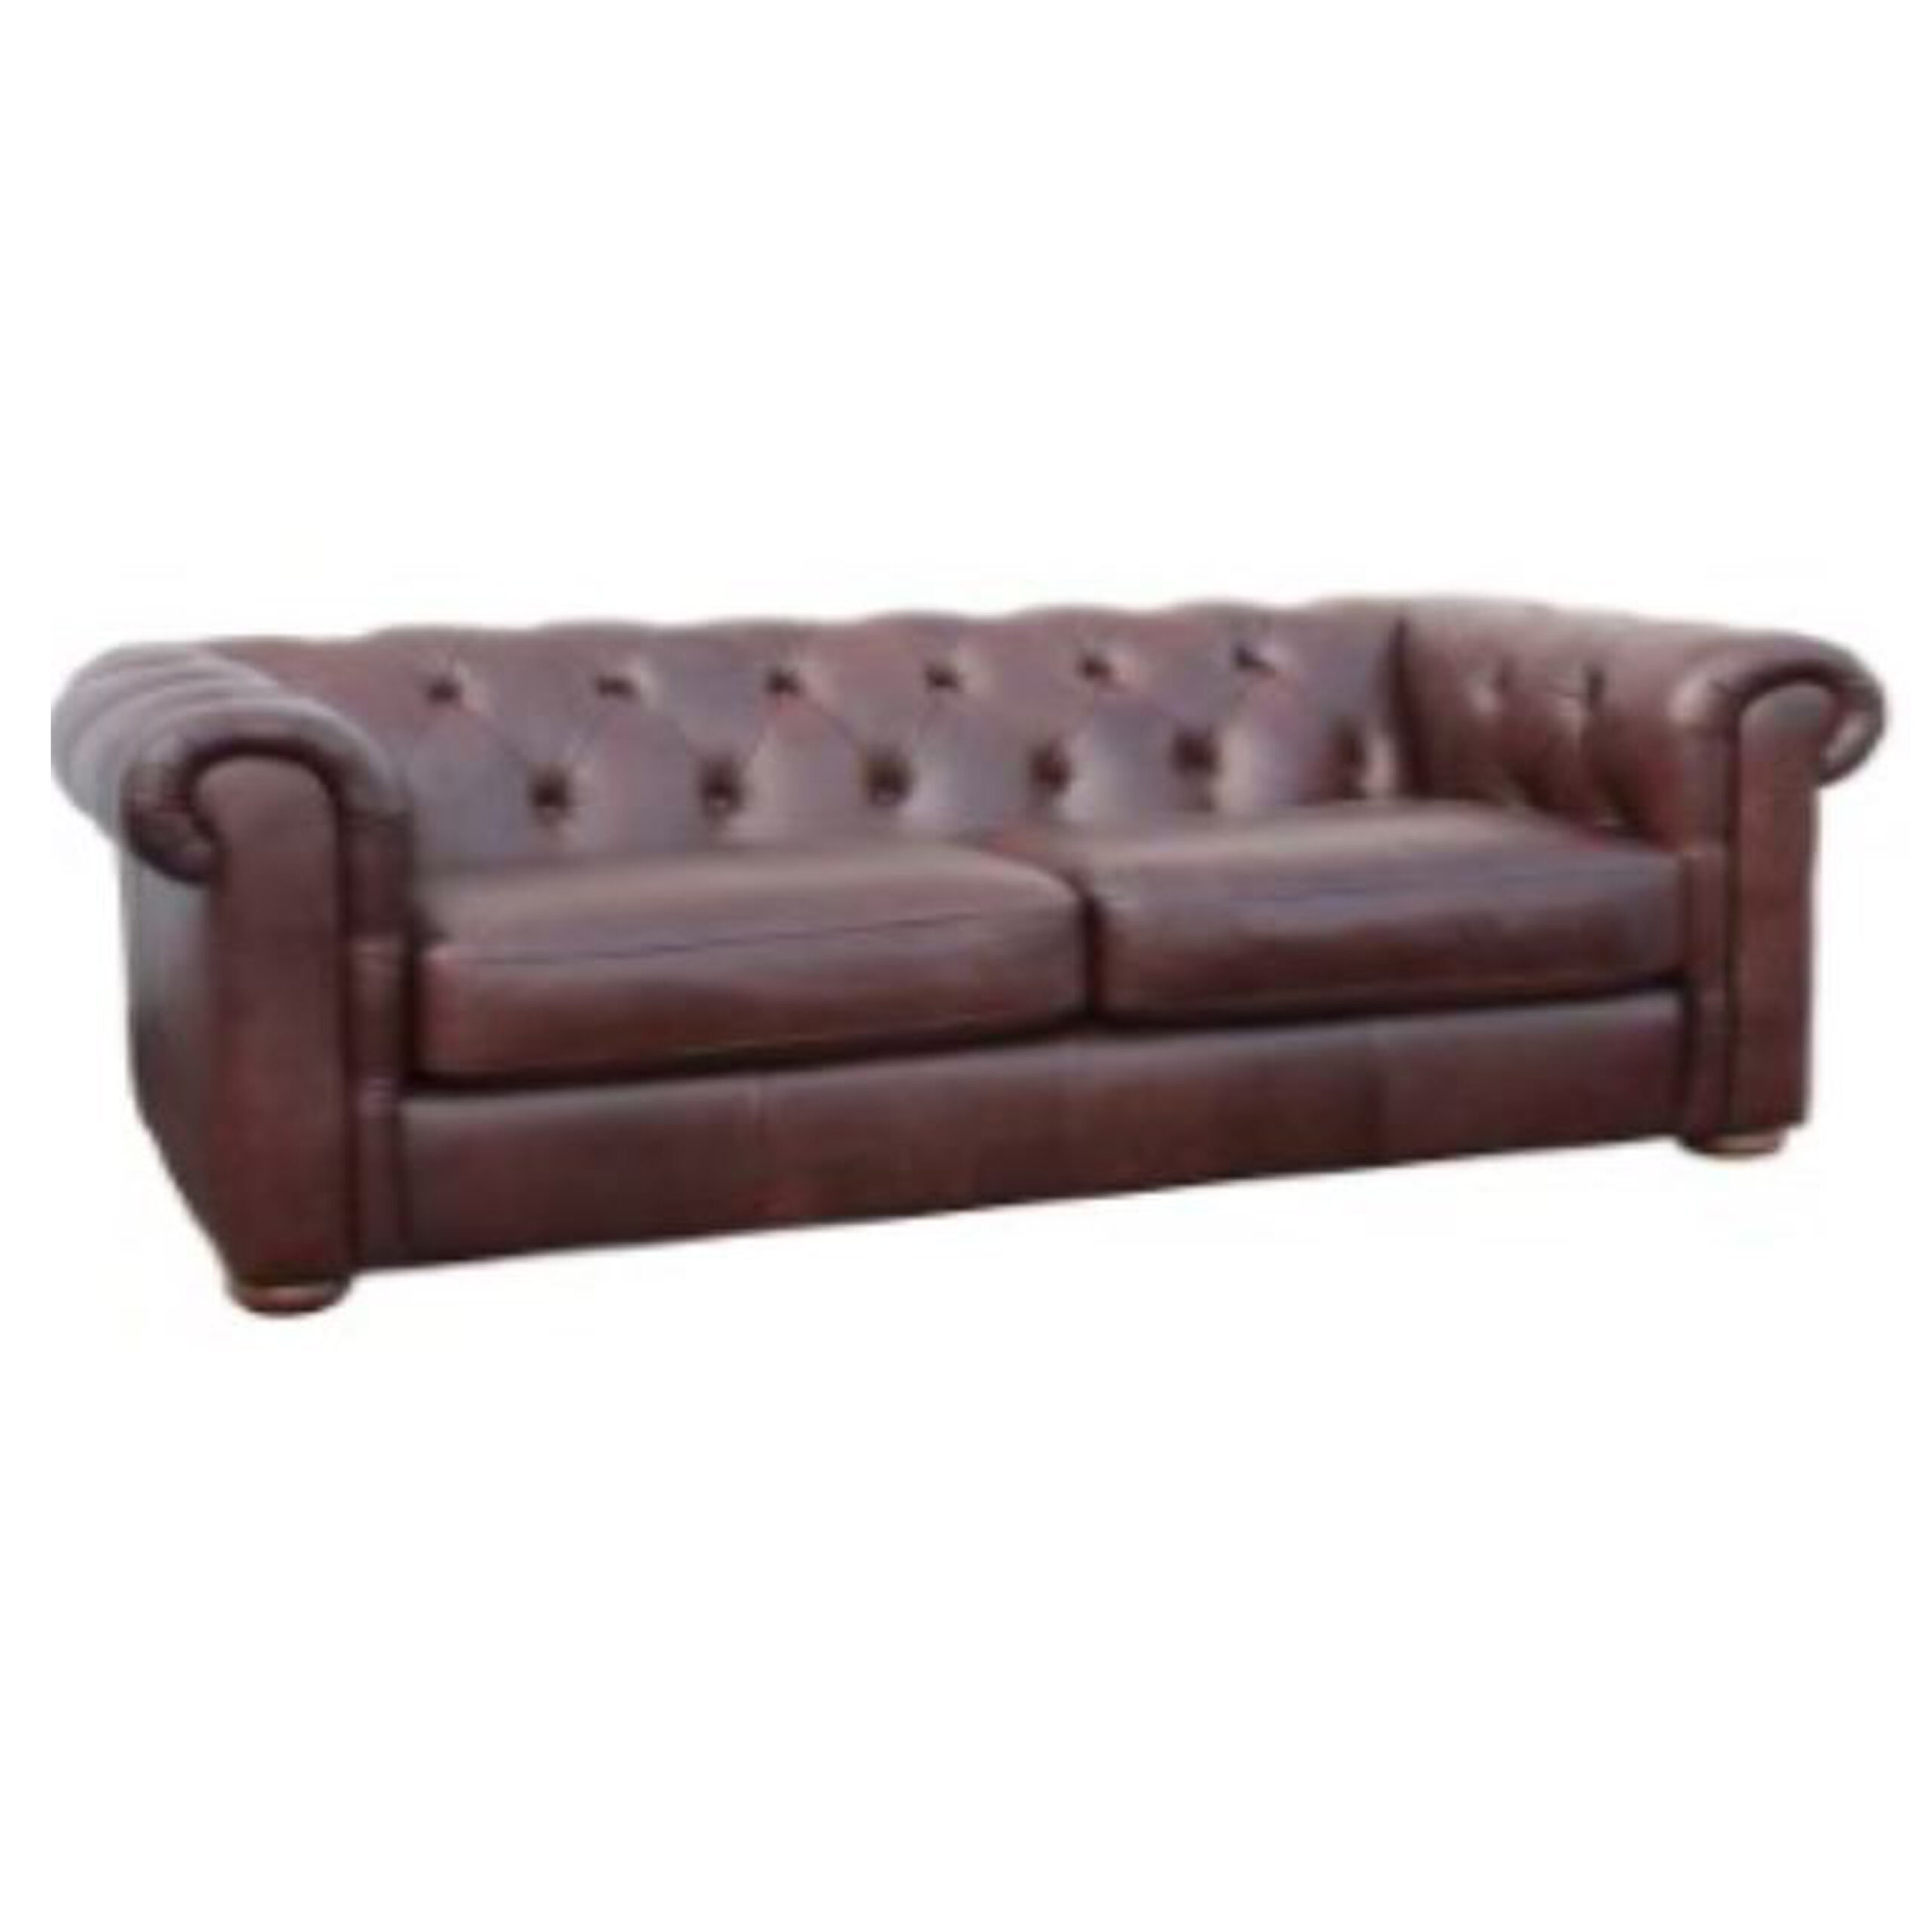 Club Chesterfield lounge sofa - 3 personers